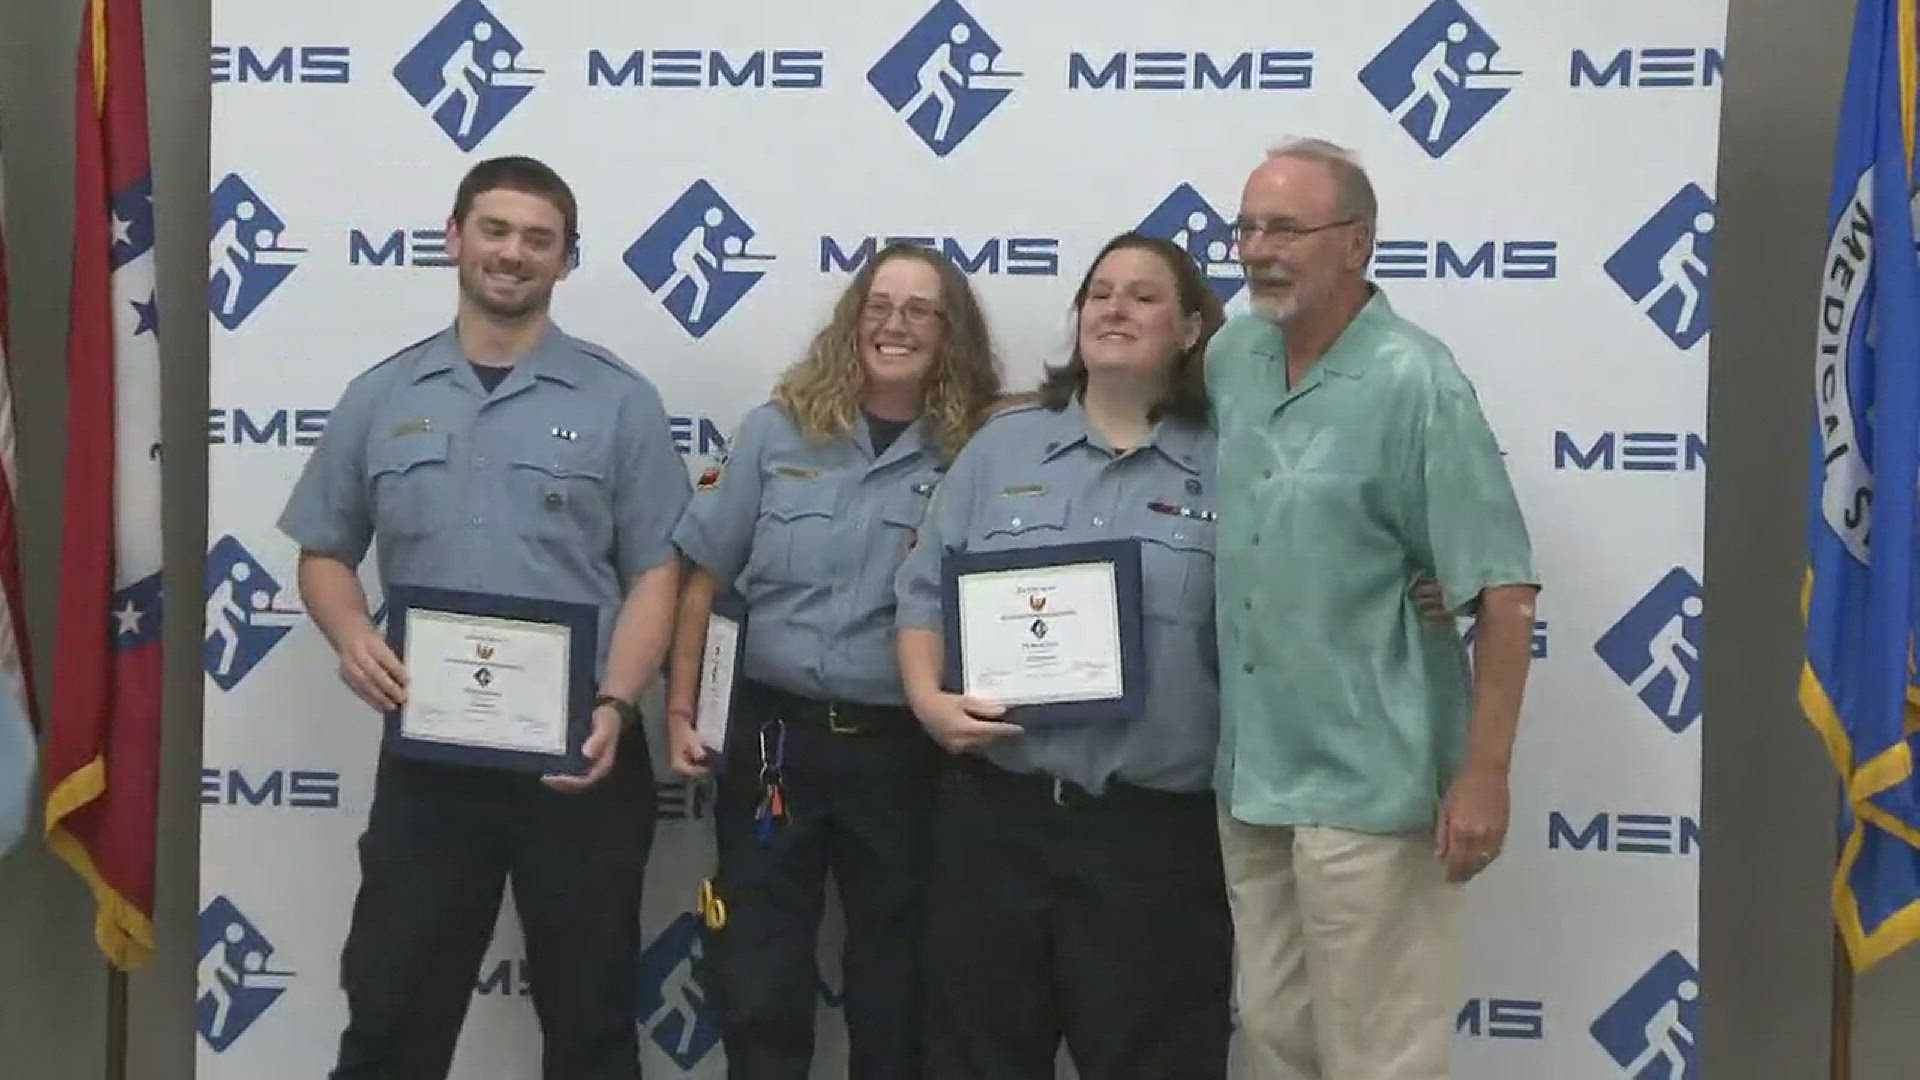 Our local life-savers got some recognition for their everyday heroics on Tuesday